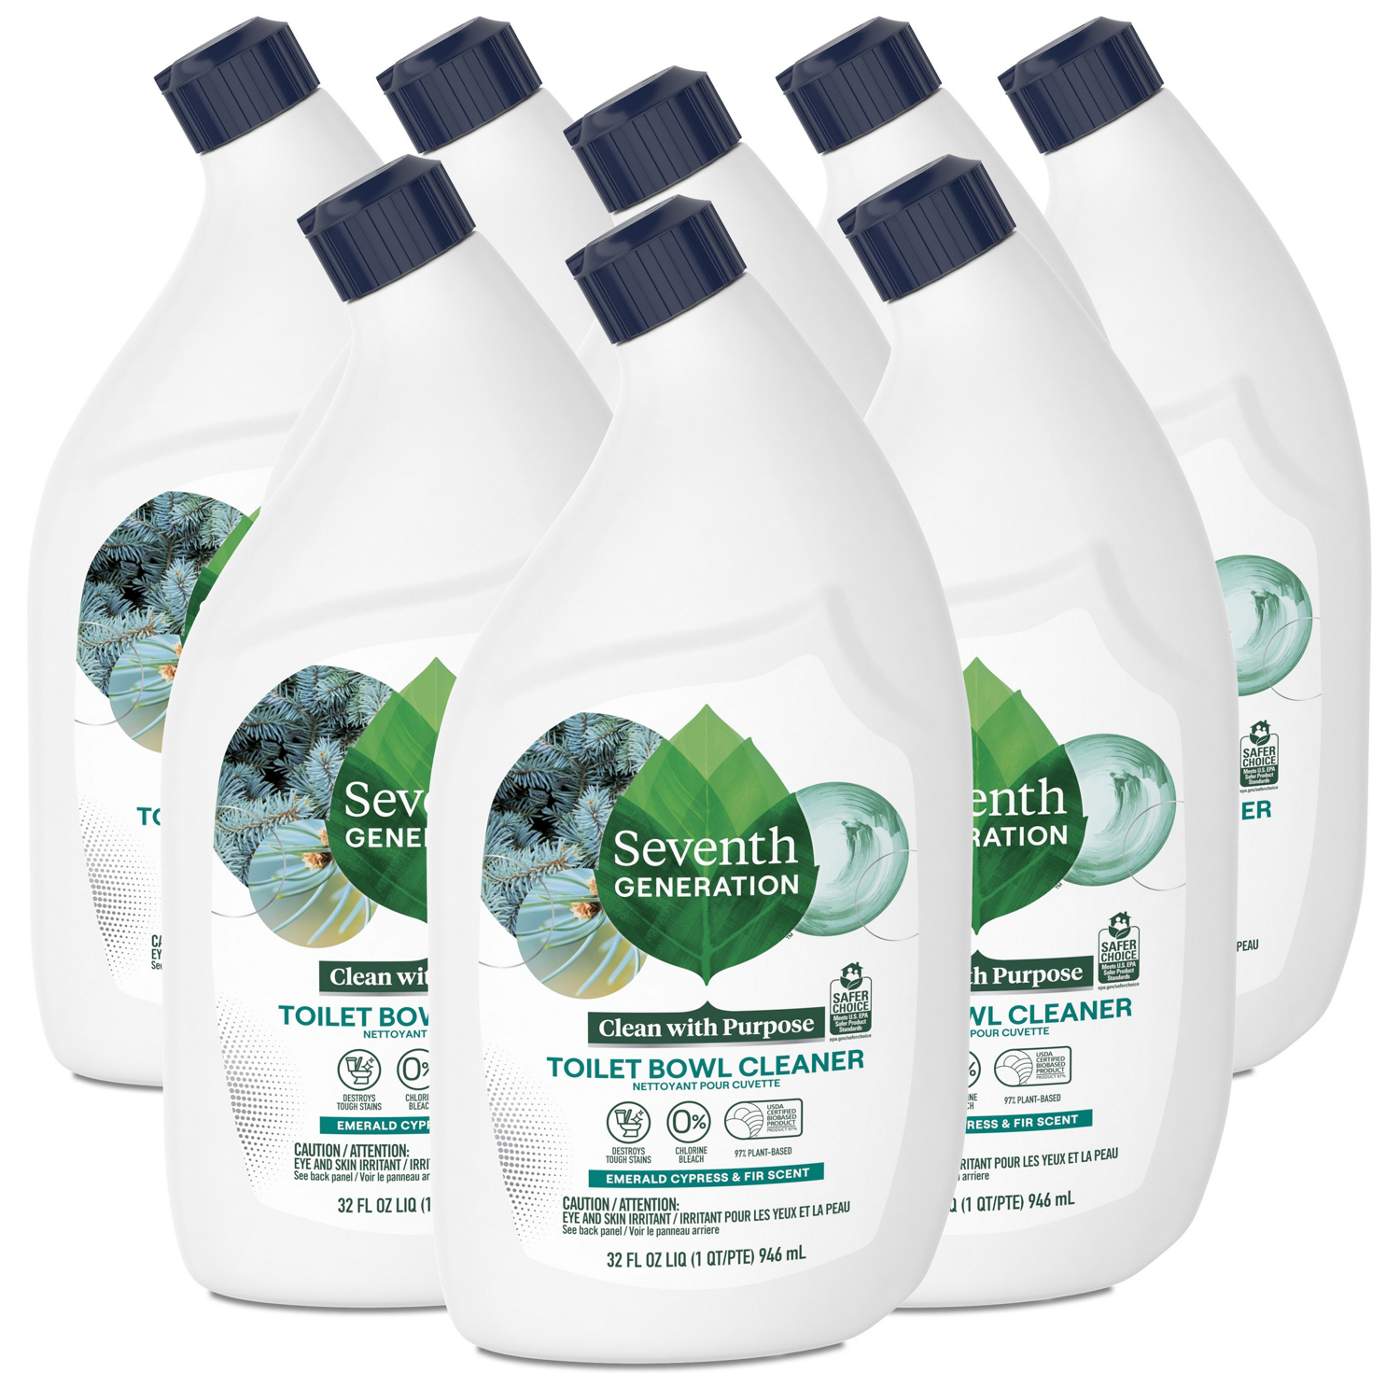 Seventh Generation Emerald Cypress & Fir Toilet Bowl Cleaner; image 4 of 7